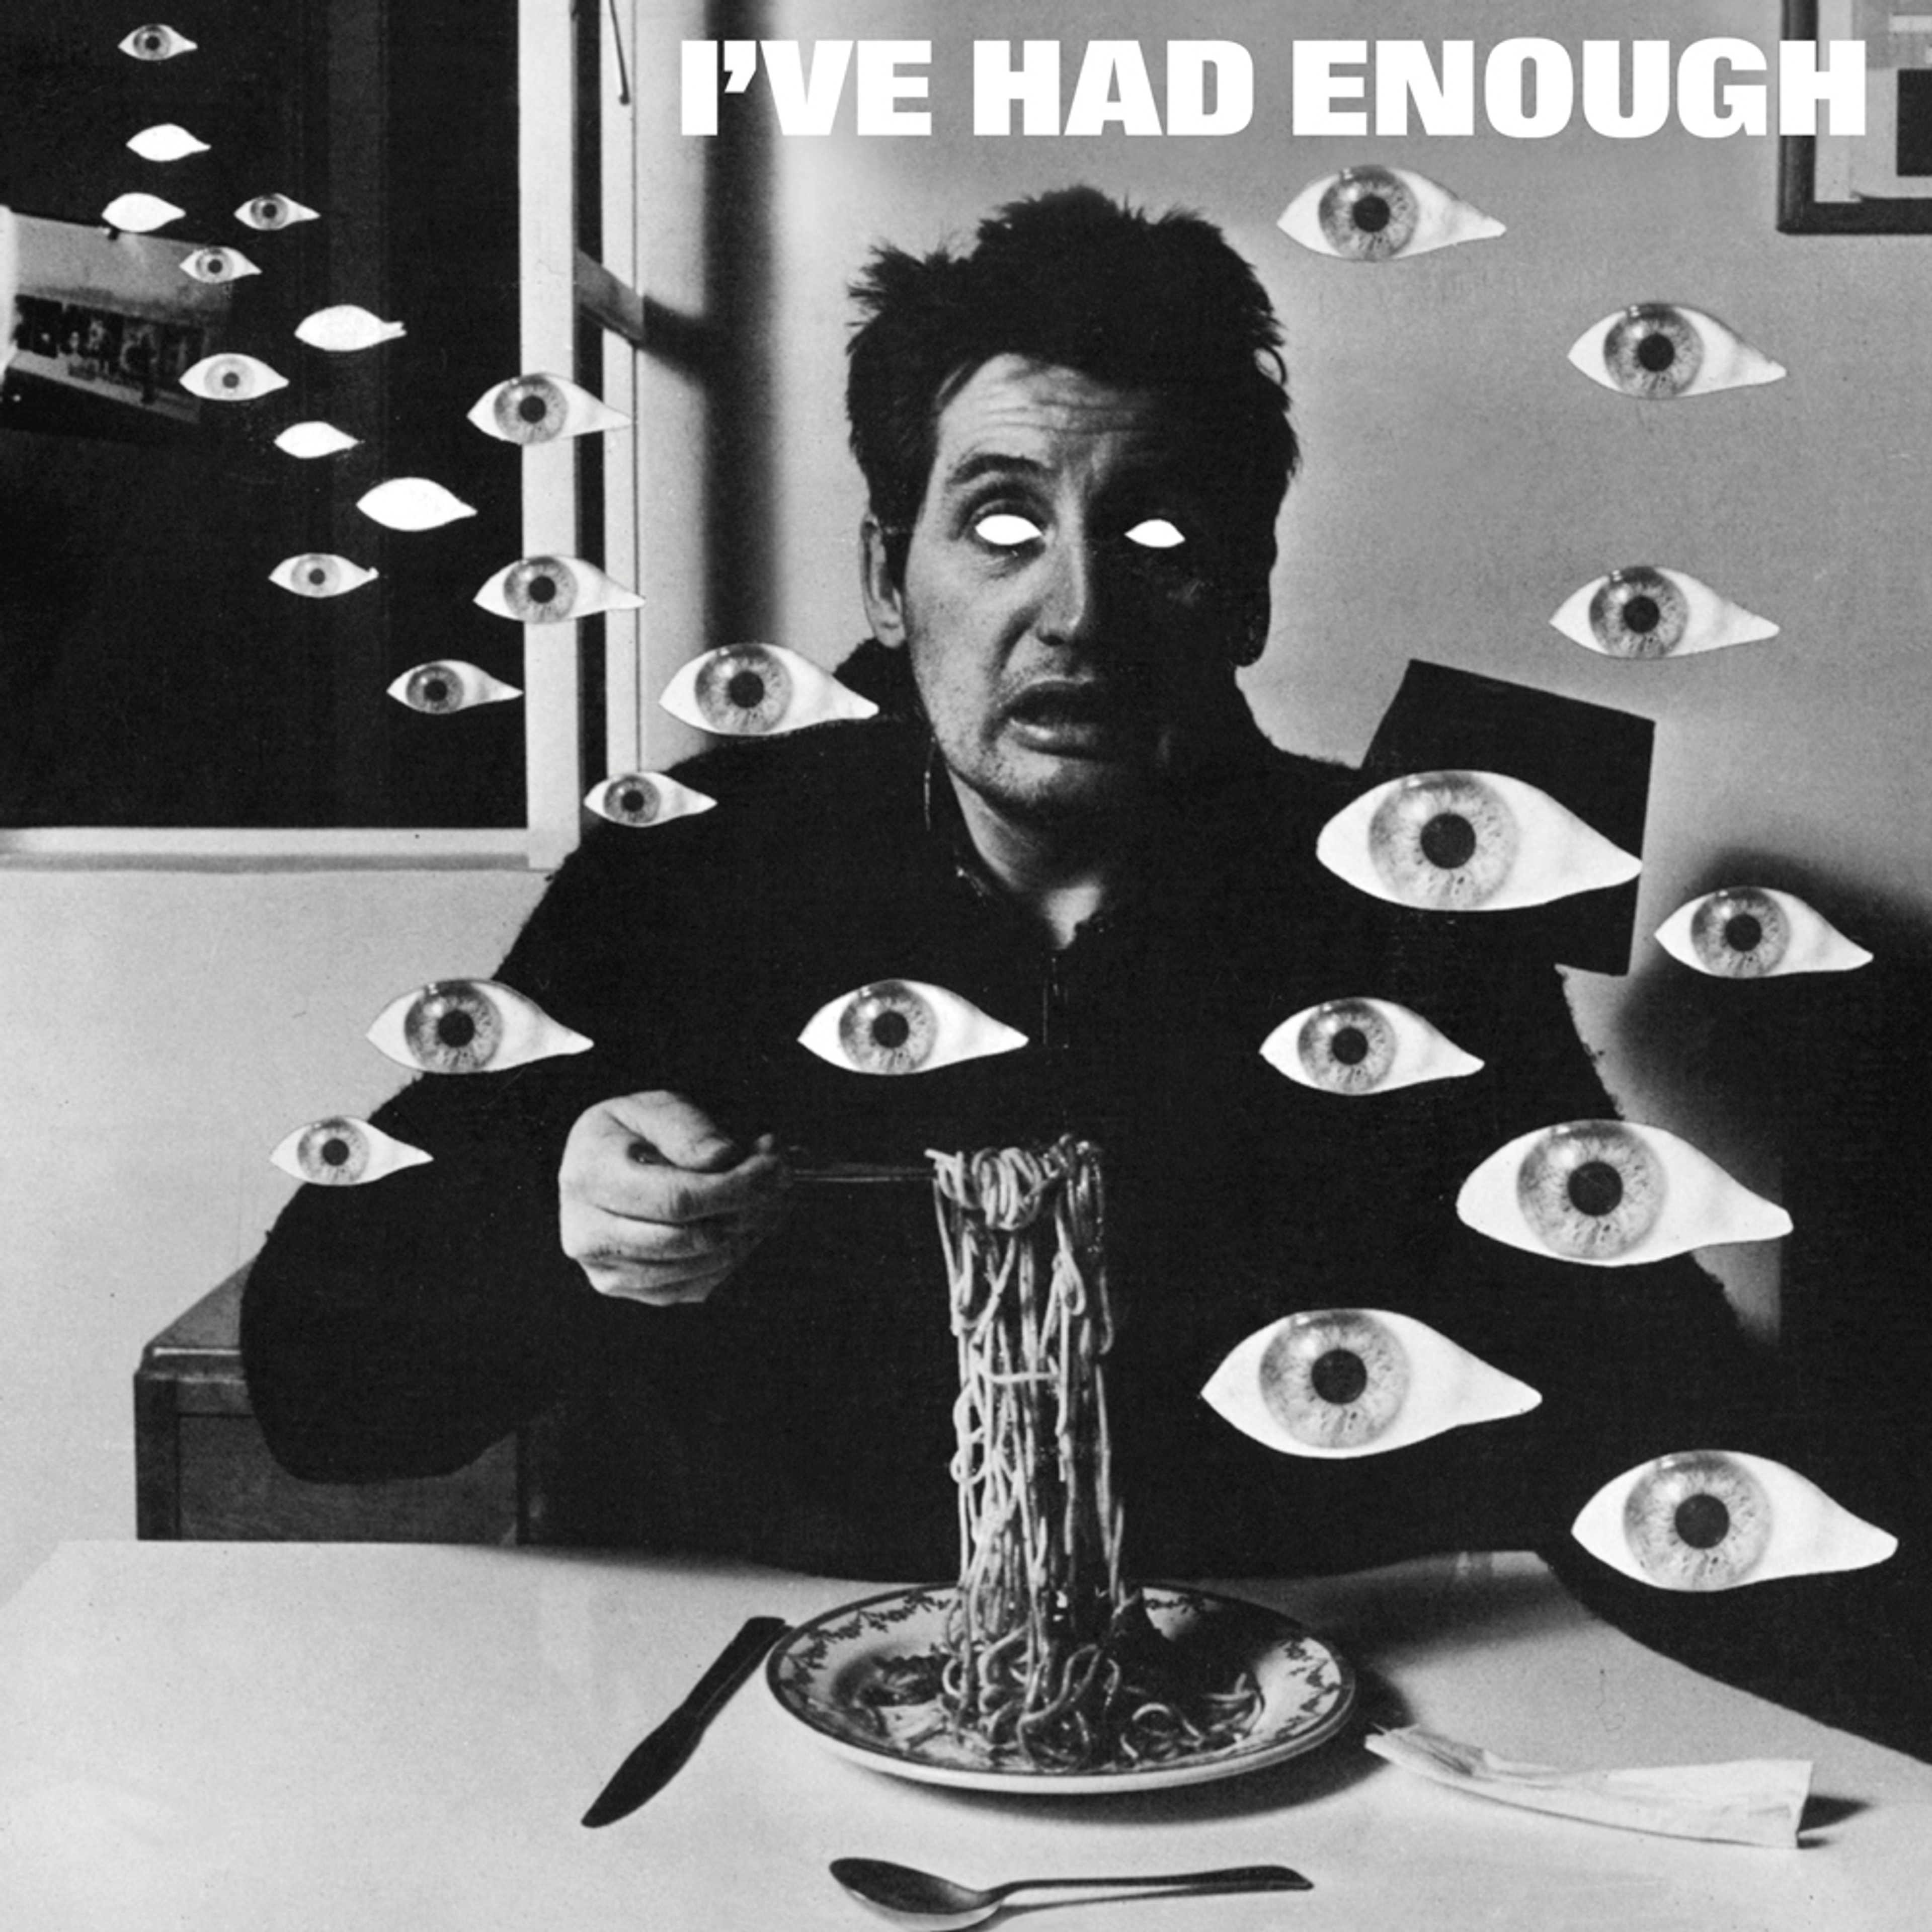 “I've Had Enough” Single artwork as featured in 'The 7" Singles Box'